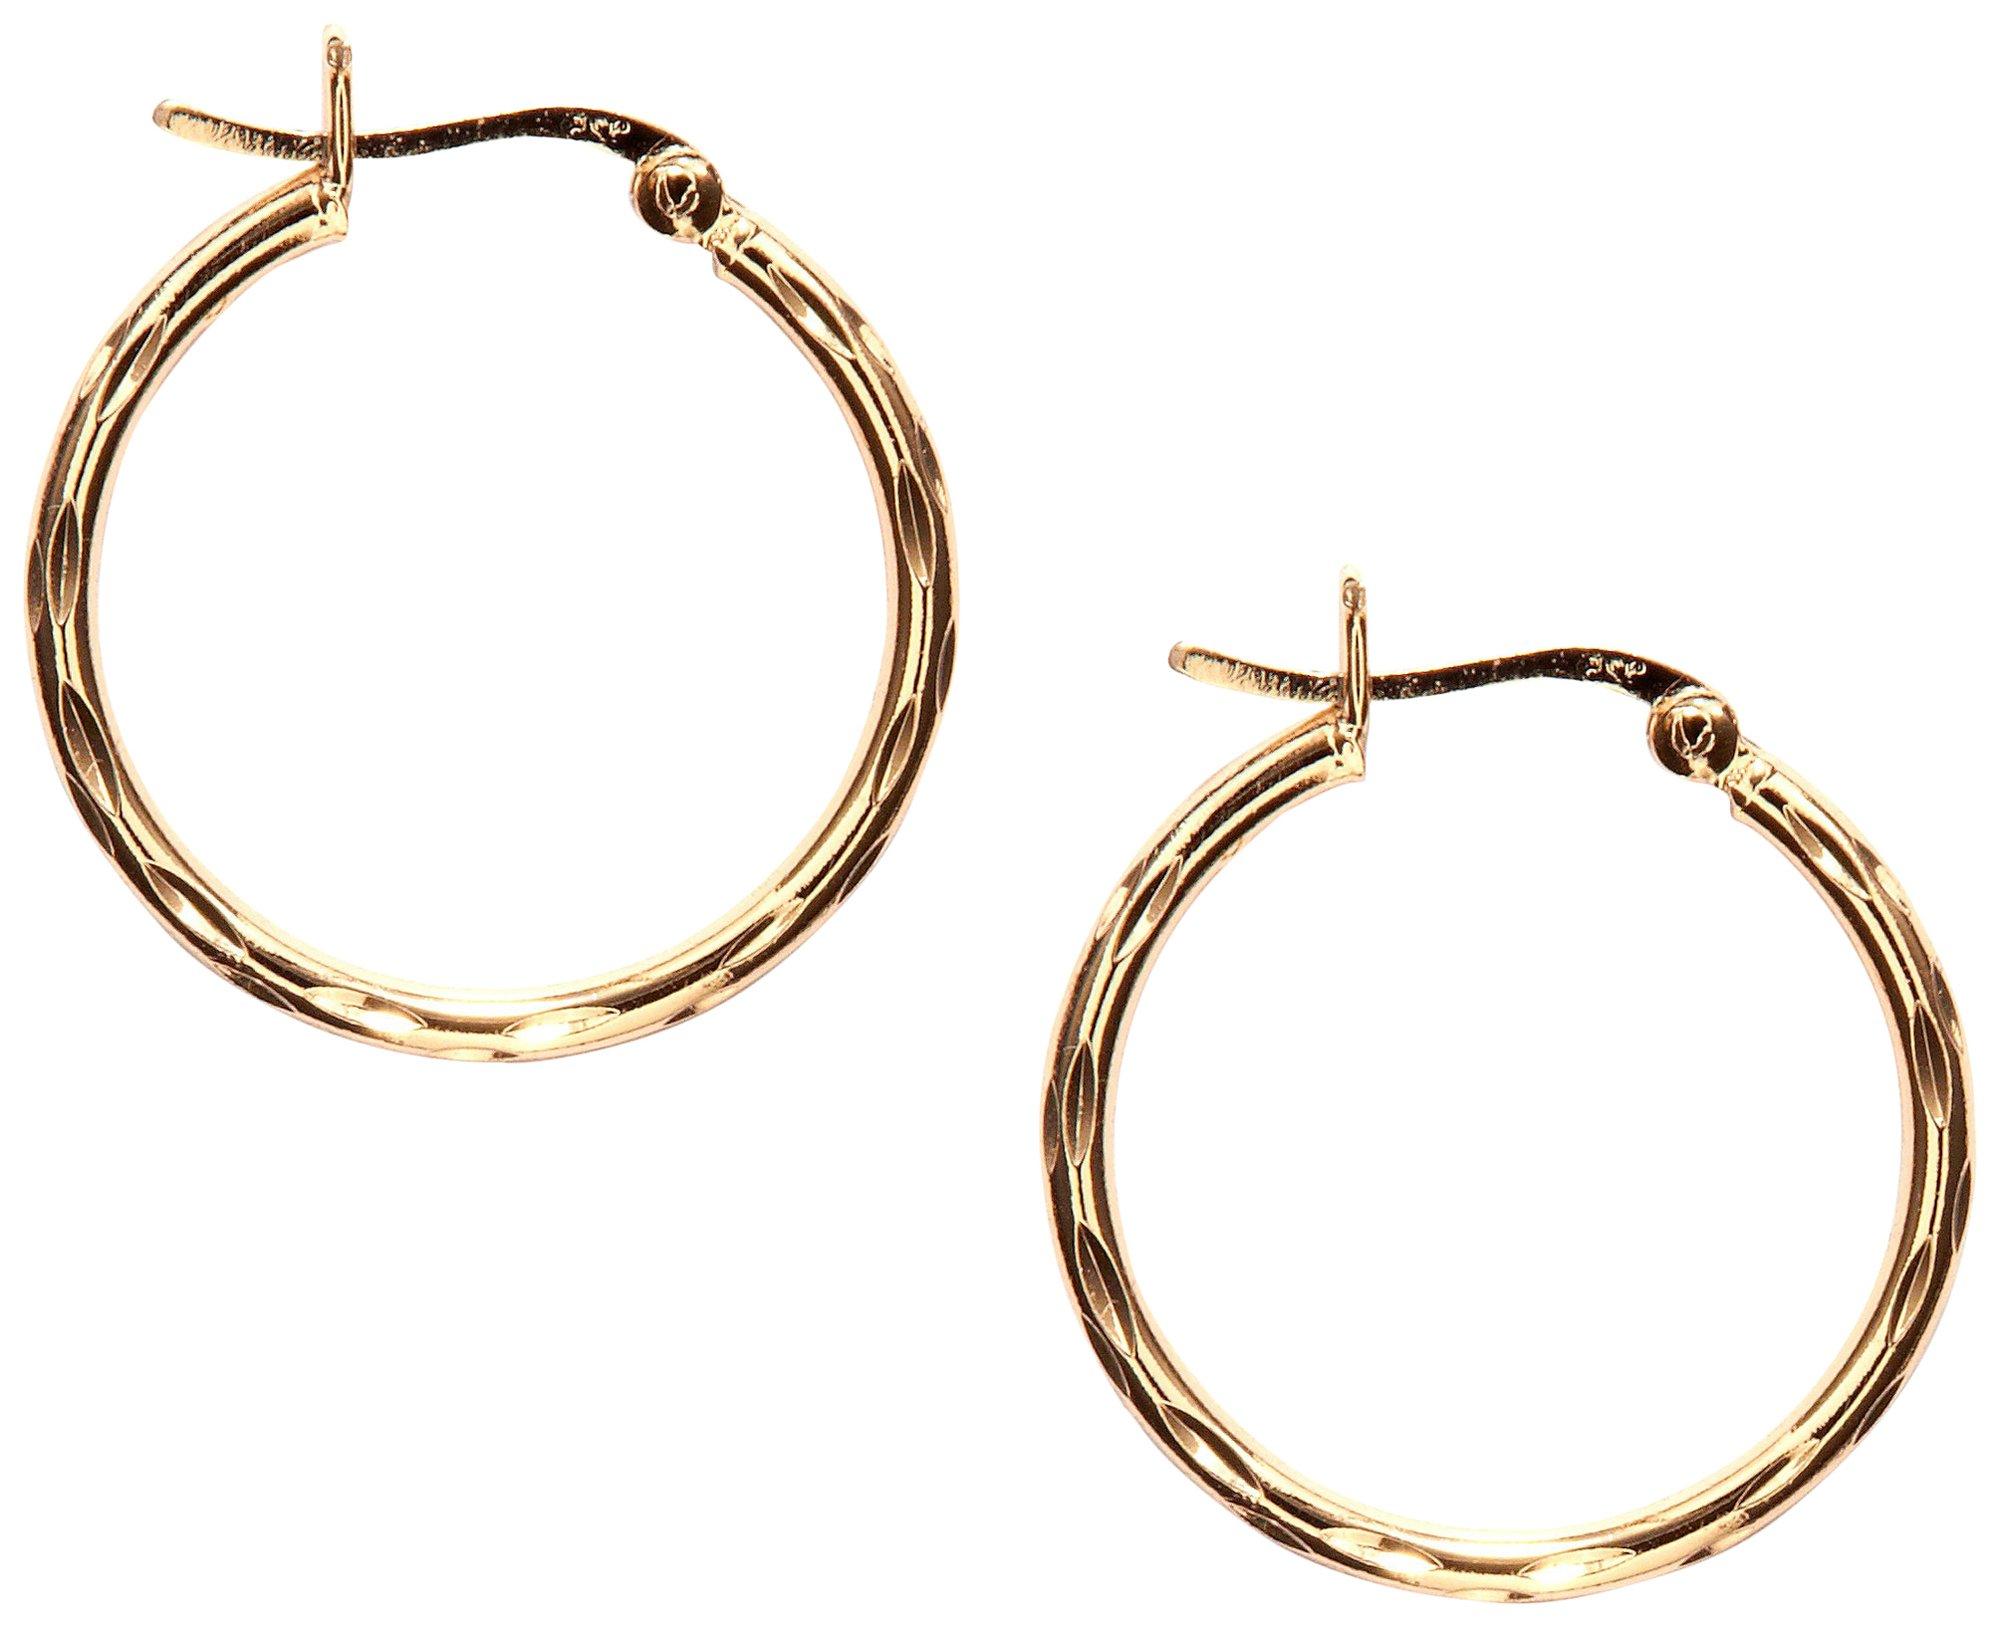 Piper & Taylor 1 In. Textured Gold Plate Hoop Earrings